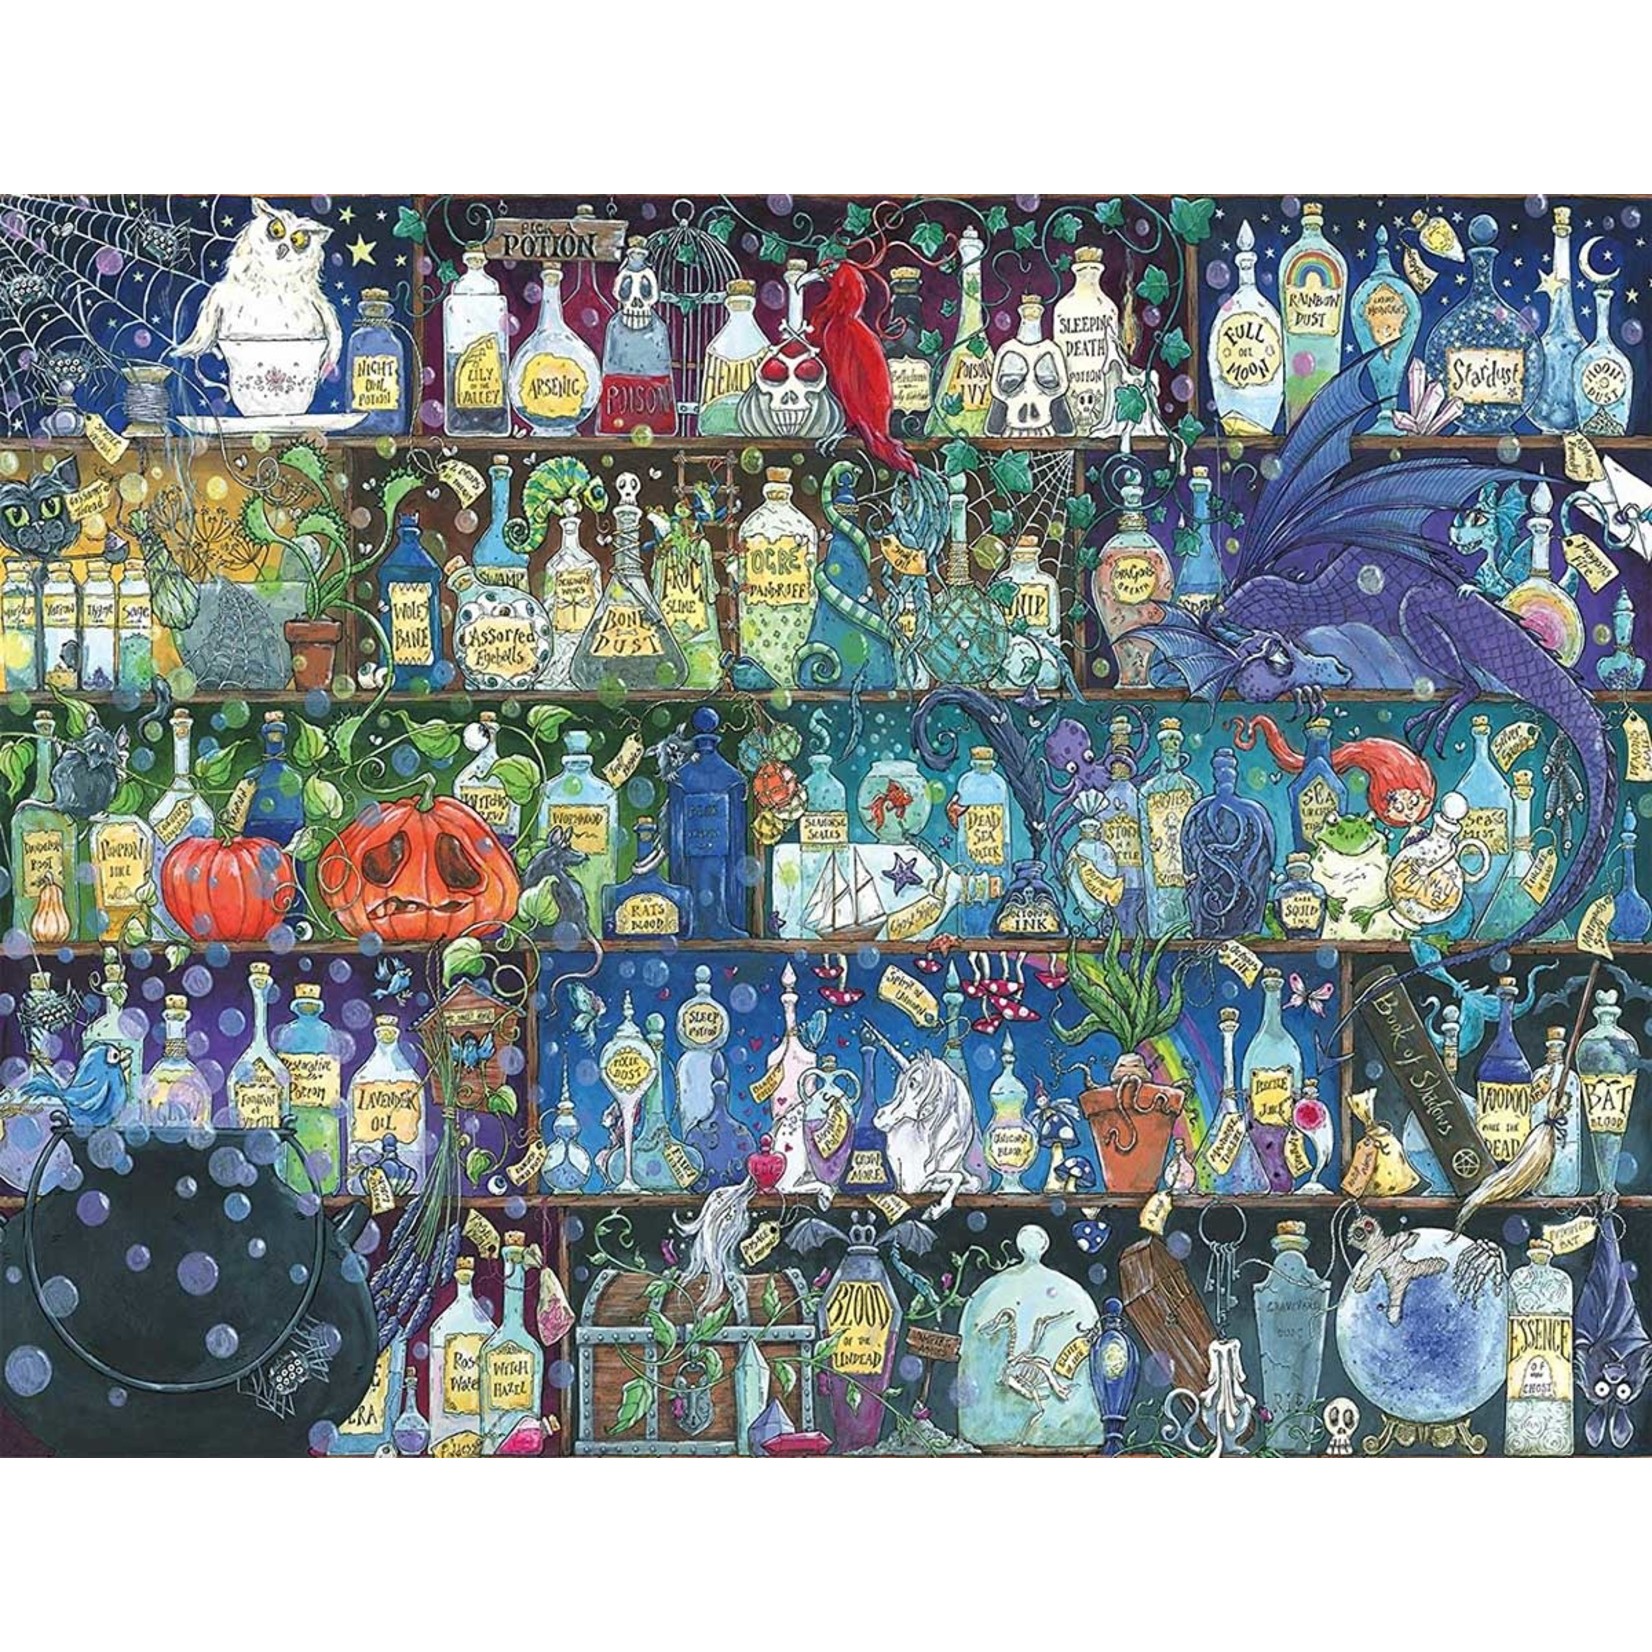 Poisons and Potions 2000 Piece Puzzle